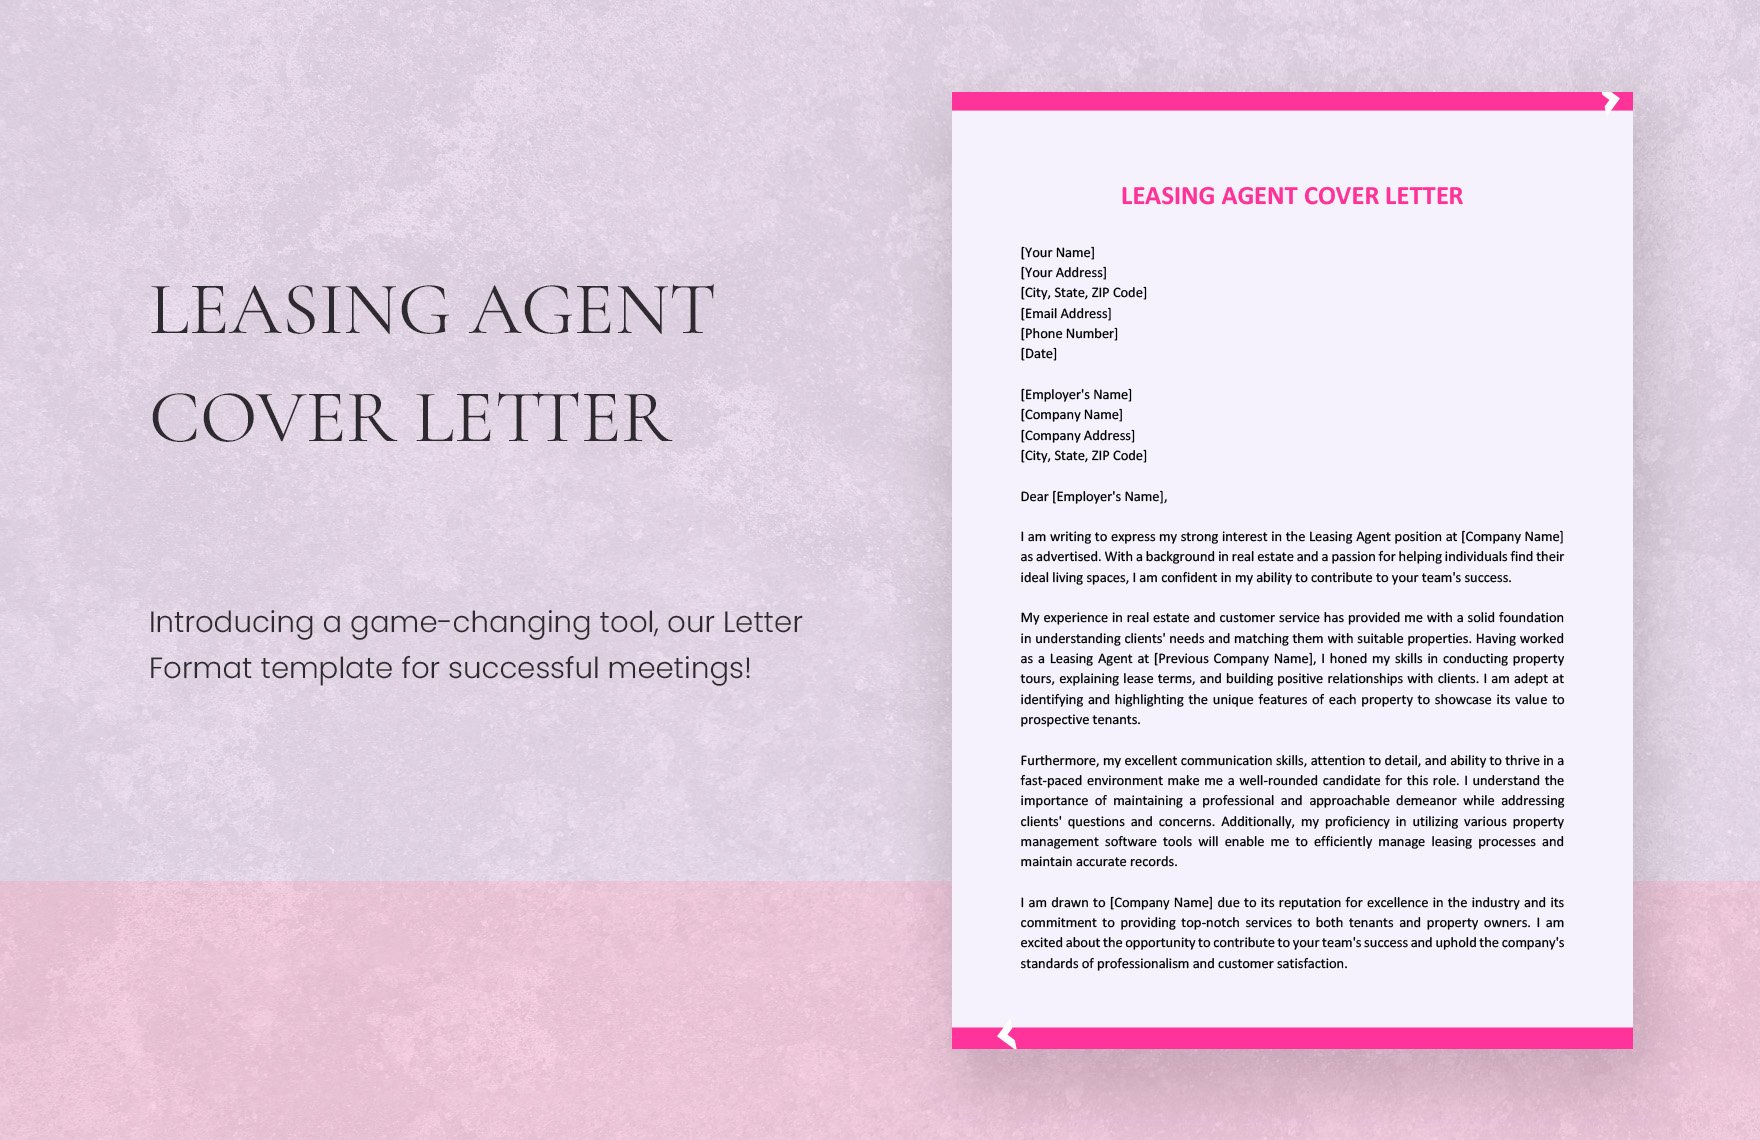 Leasing Agent Cover Letter